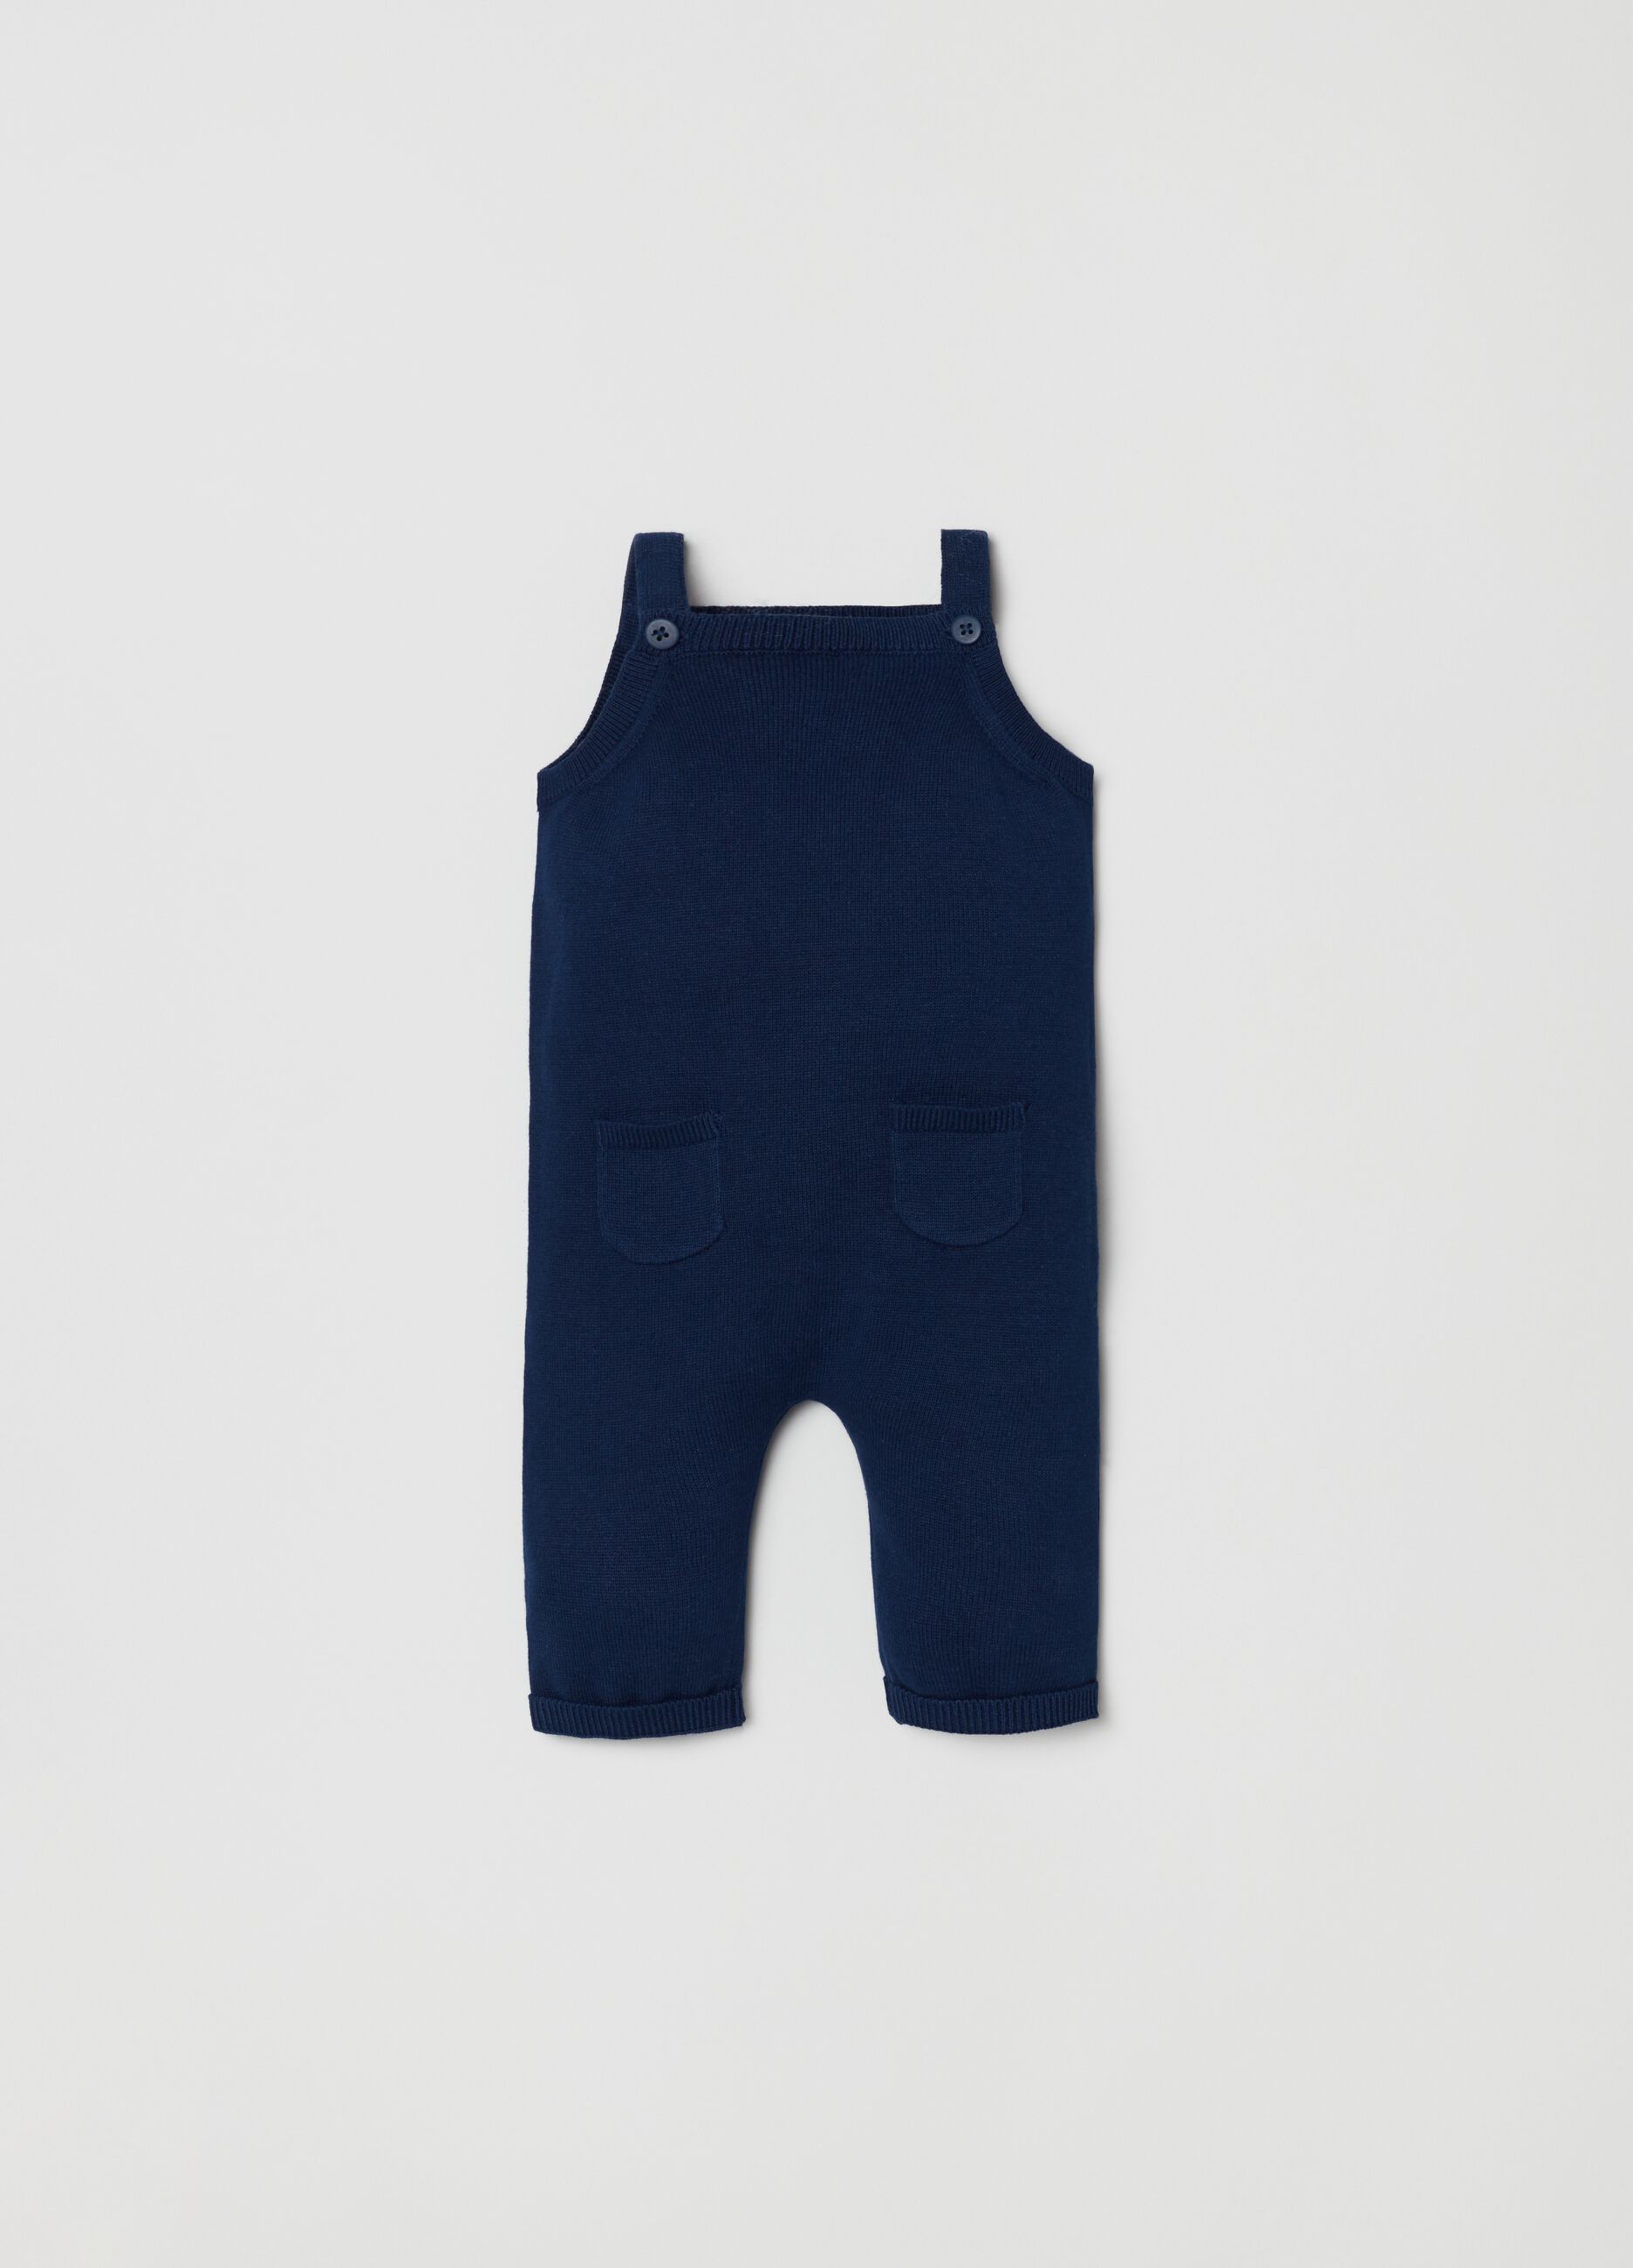 Solid colour, knitted cotton dungarees